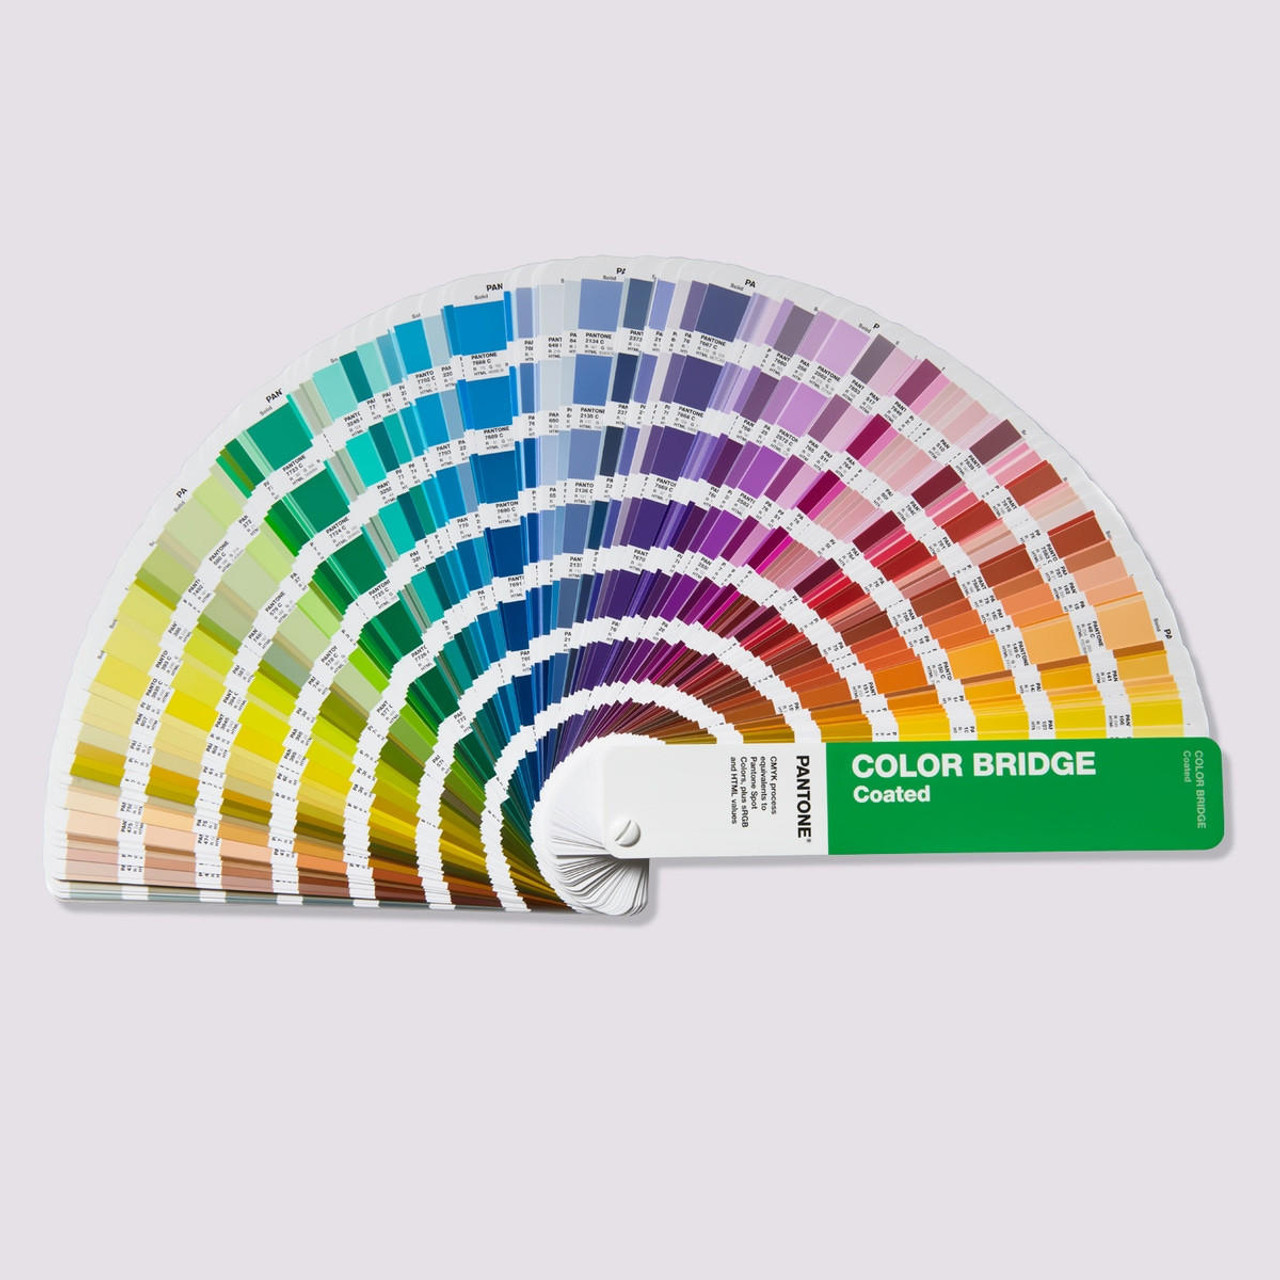 Pantone Postcards, 100 Enlarged Color Chips To Send by Snail Mail